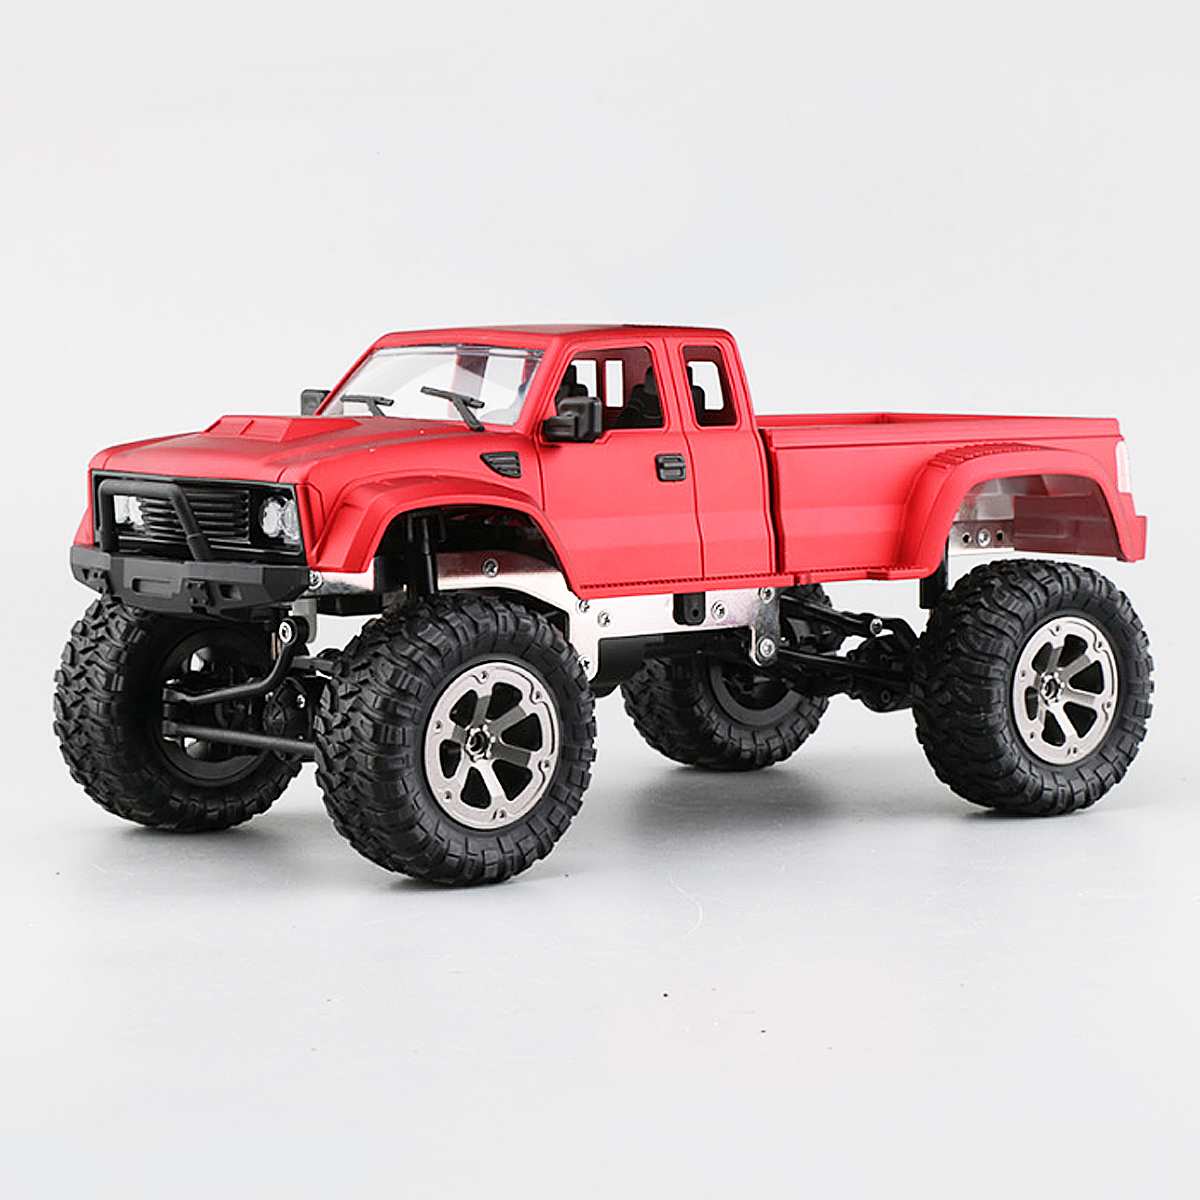 2.4GHz 1:18 Remote Control Race RC Truck Electric Monster Truck 4WD Four Wheels Off-Road Vehicle Red/Blue